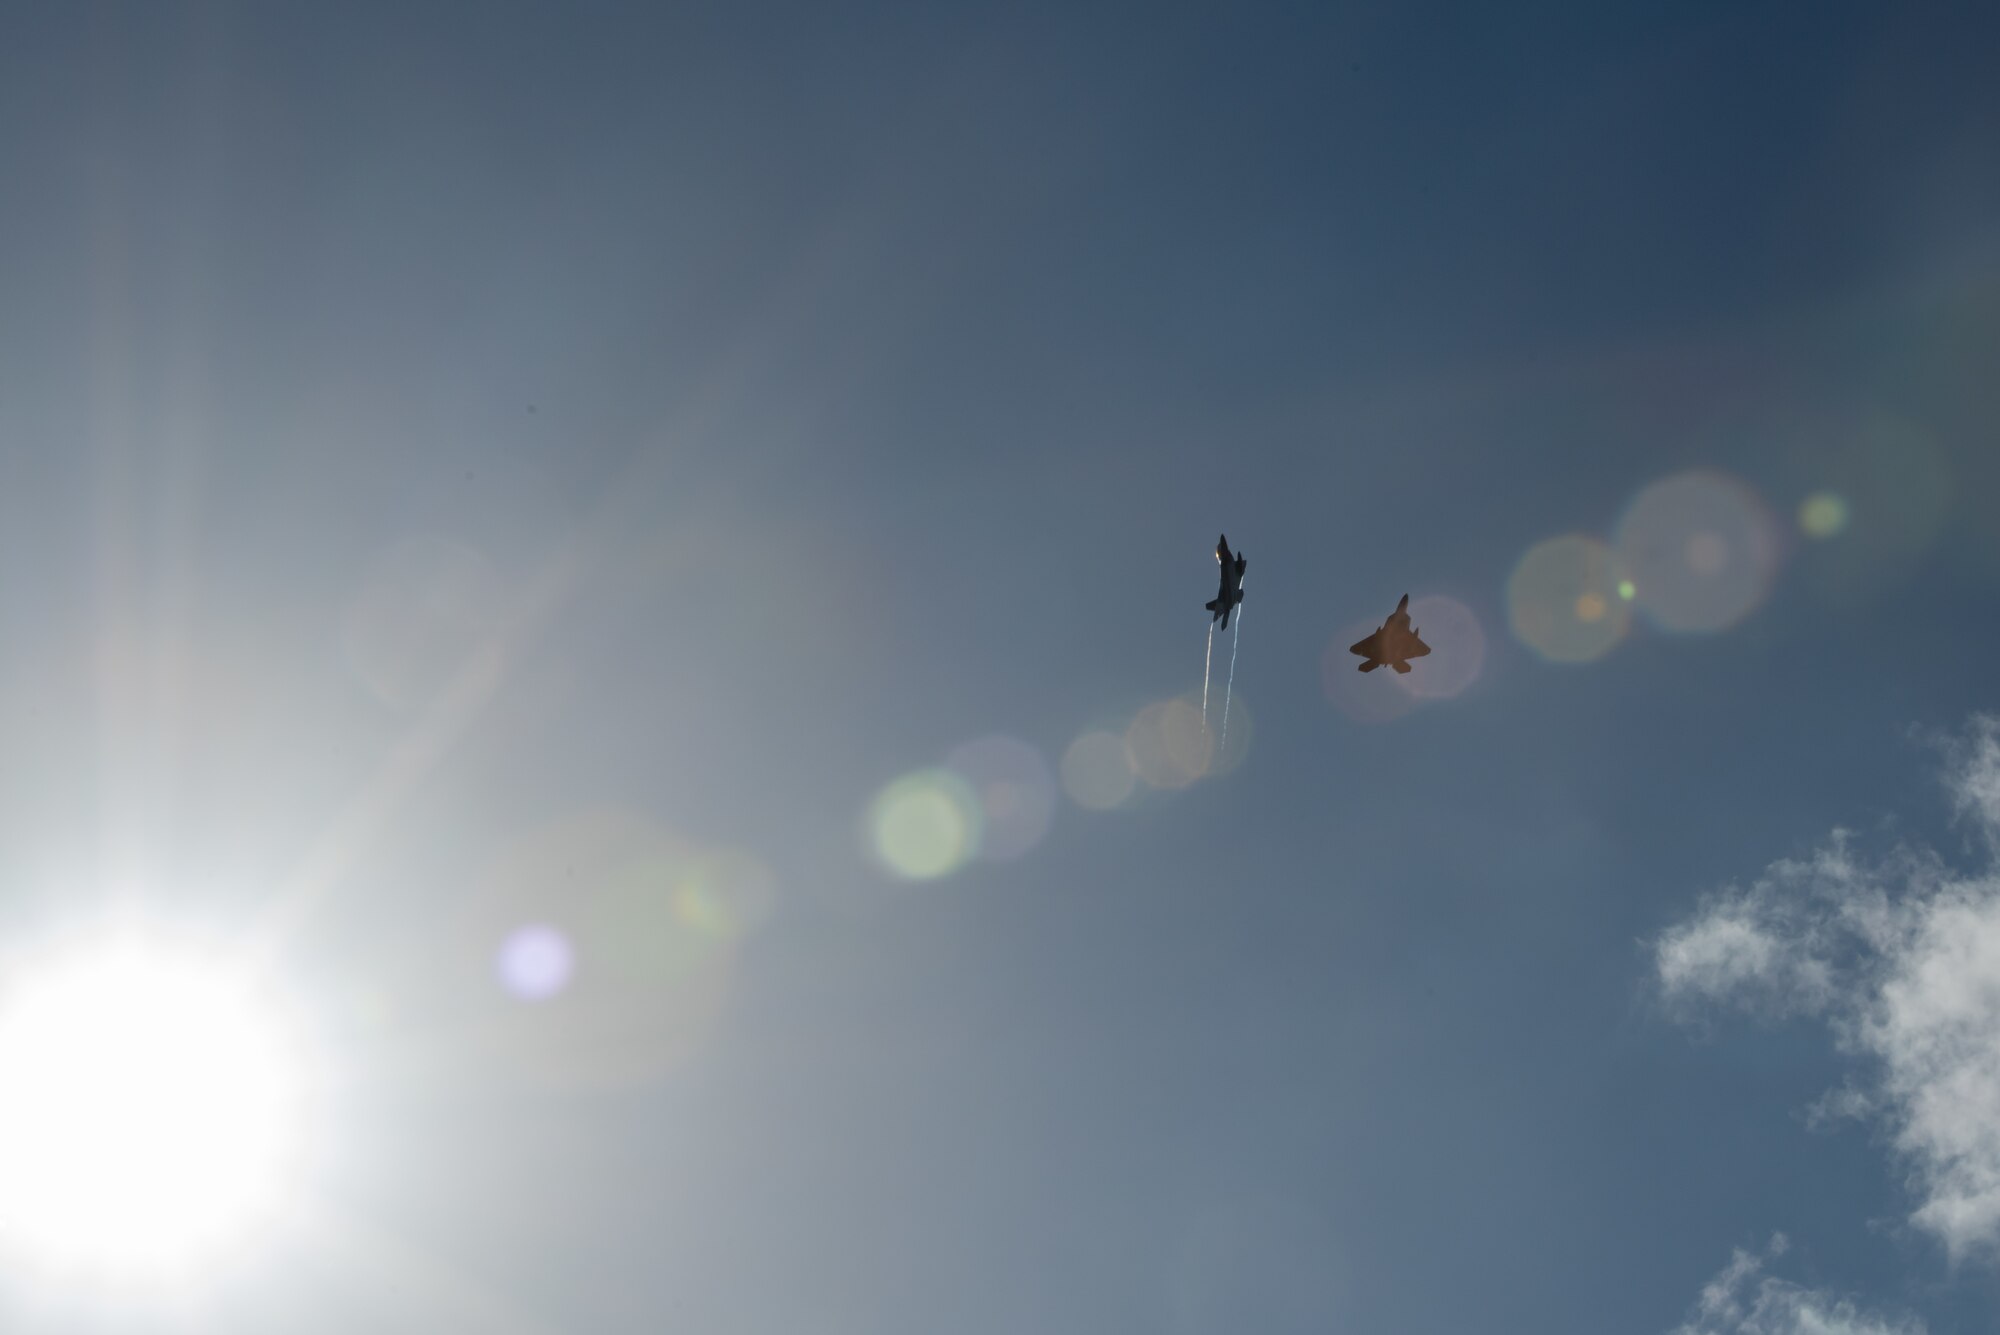 Two F-22 Raptors fly overhead with the sun in the lower left corner. One F-22 breaks away while the other F-22 flies straight ahead.